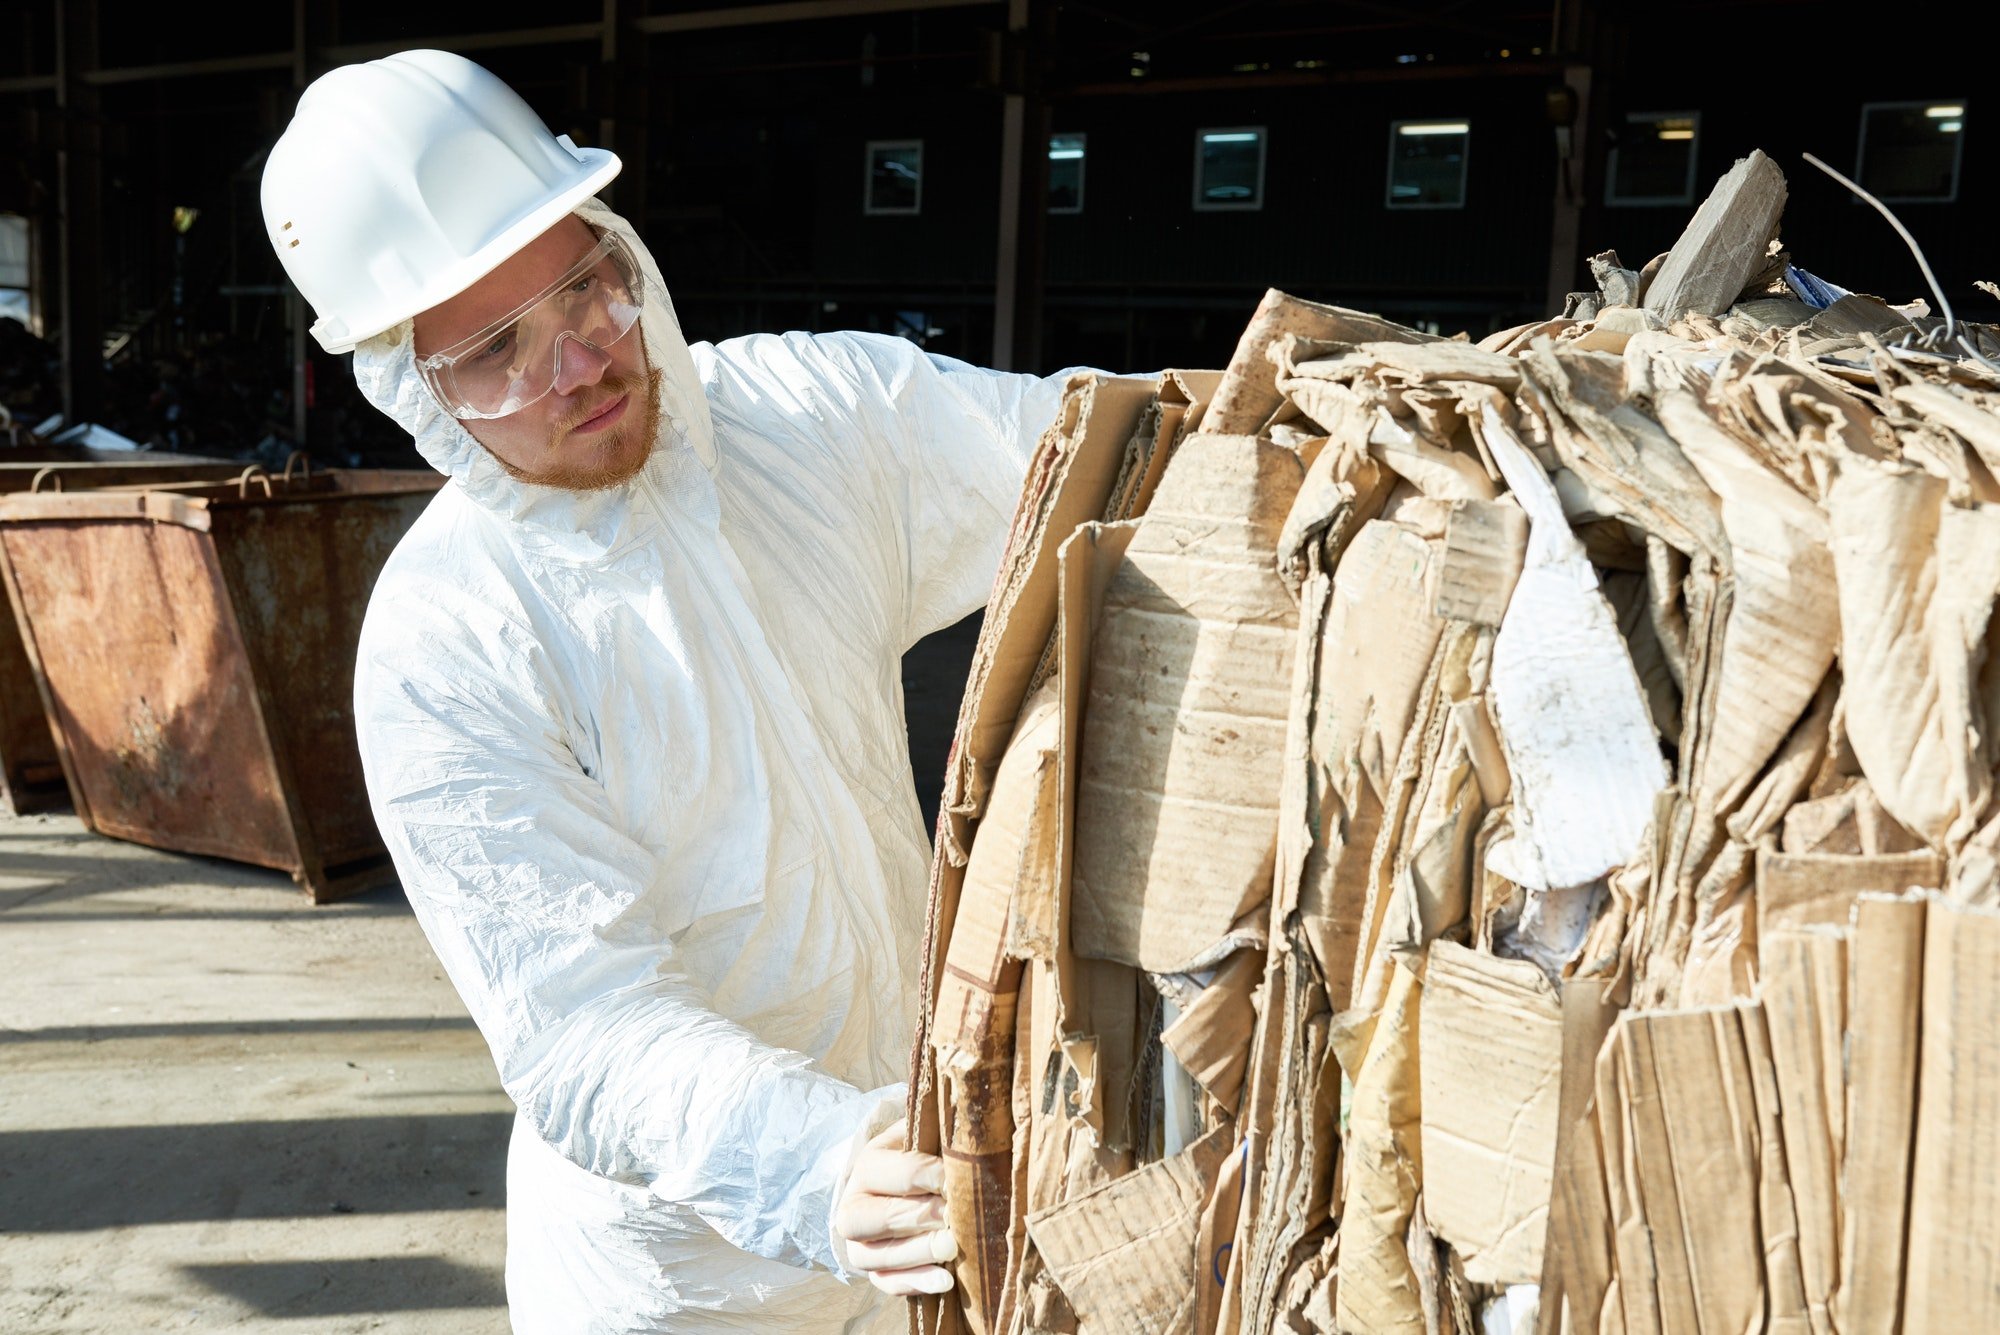 Worker in Hazmat Suit Sorting Cardboard at Recycling Factory